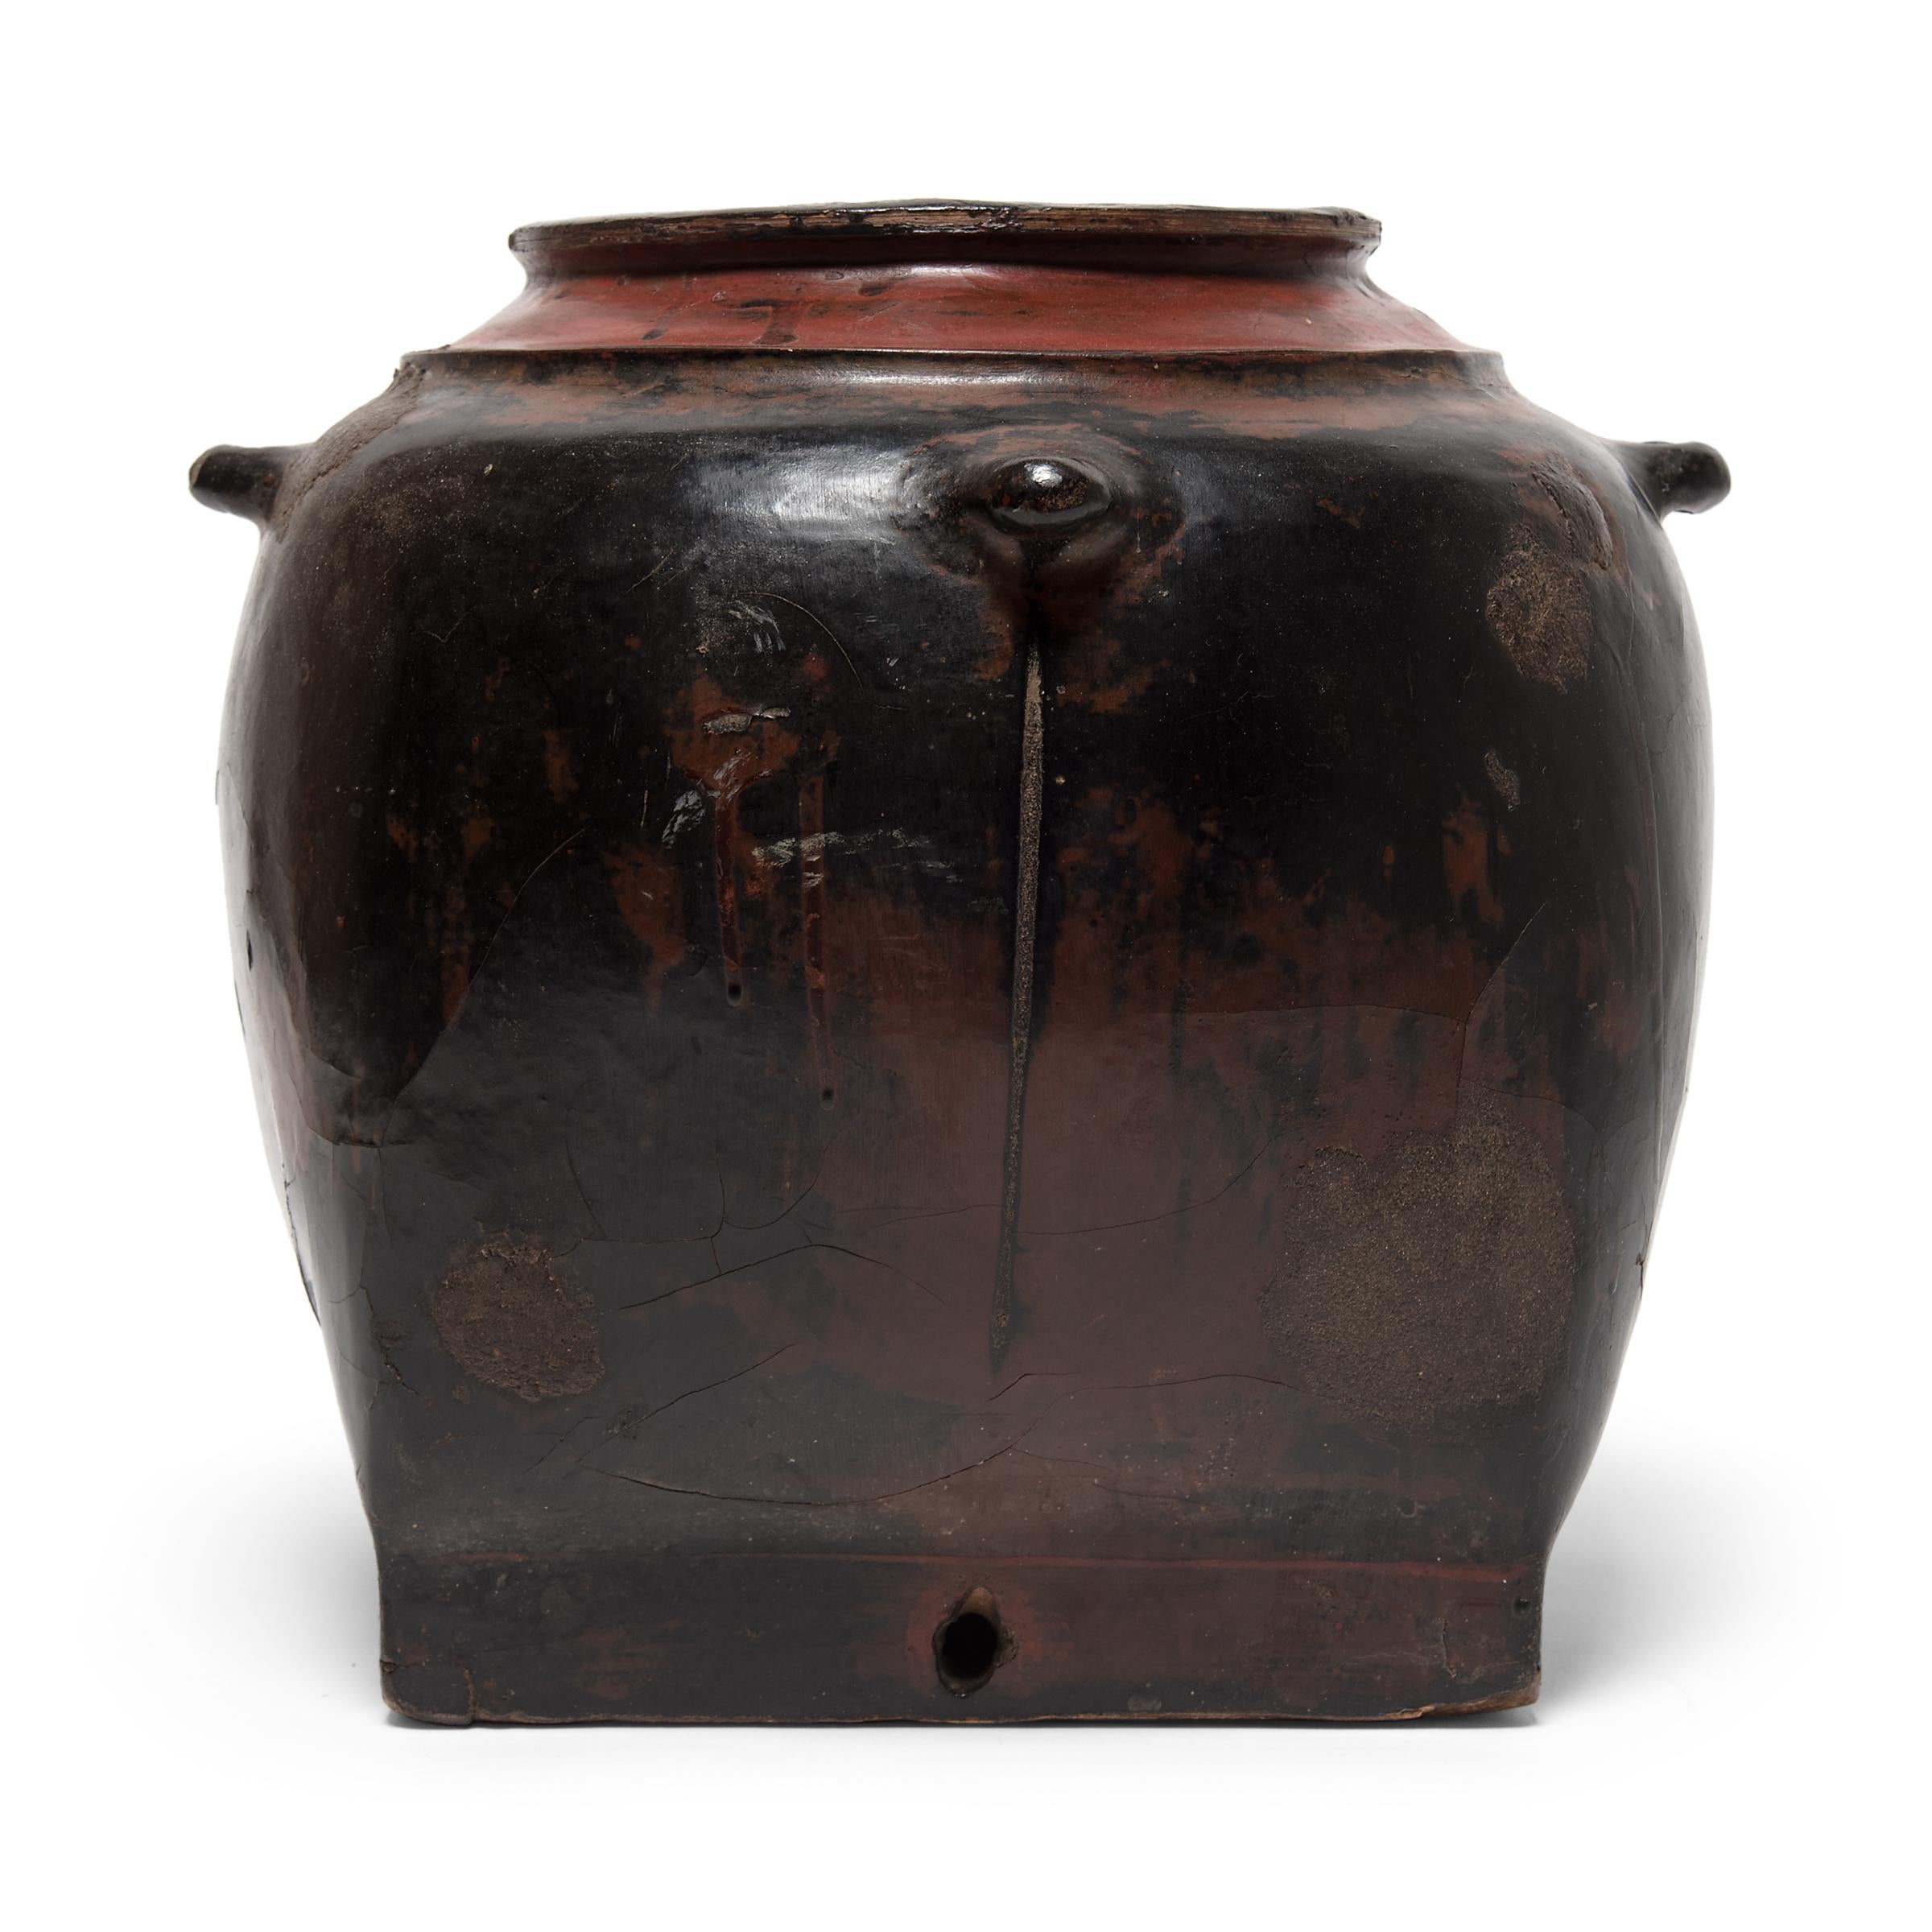 This round Burmese vessel was likely designed as hanging storage for everyday use. A thin core structure of wood and clay was then cloaked in black and red cinnabar lacquer for stability and decoration. The remarkably lightweight vessel is wonderful